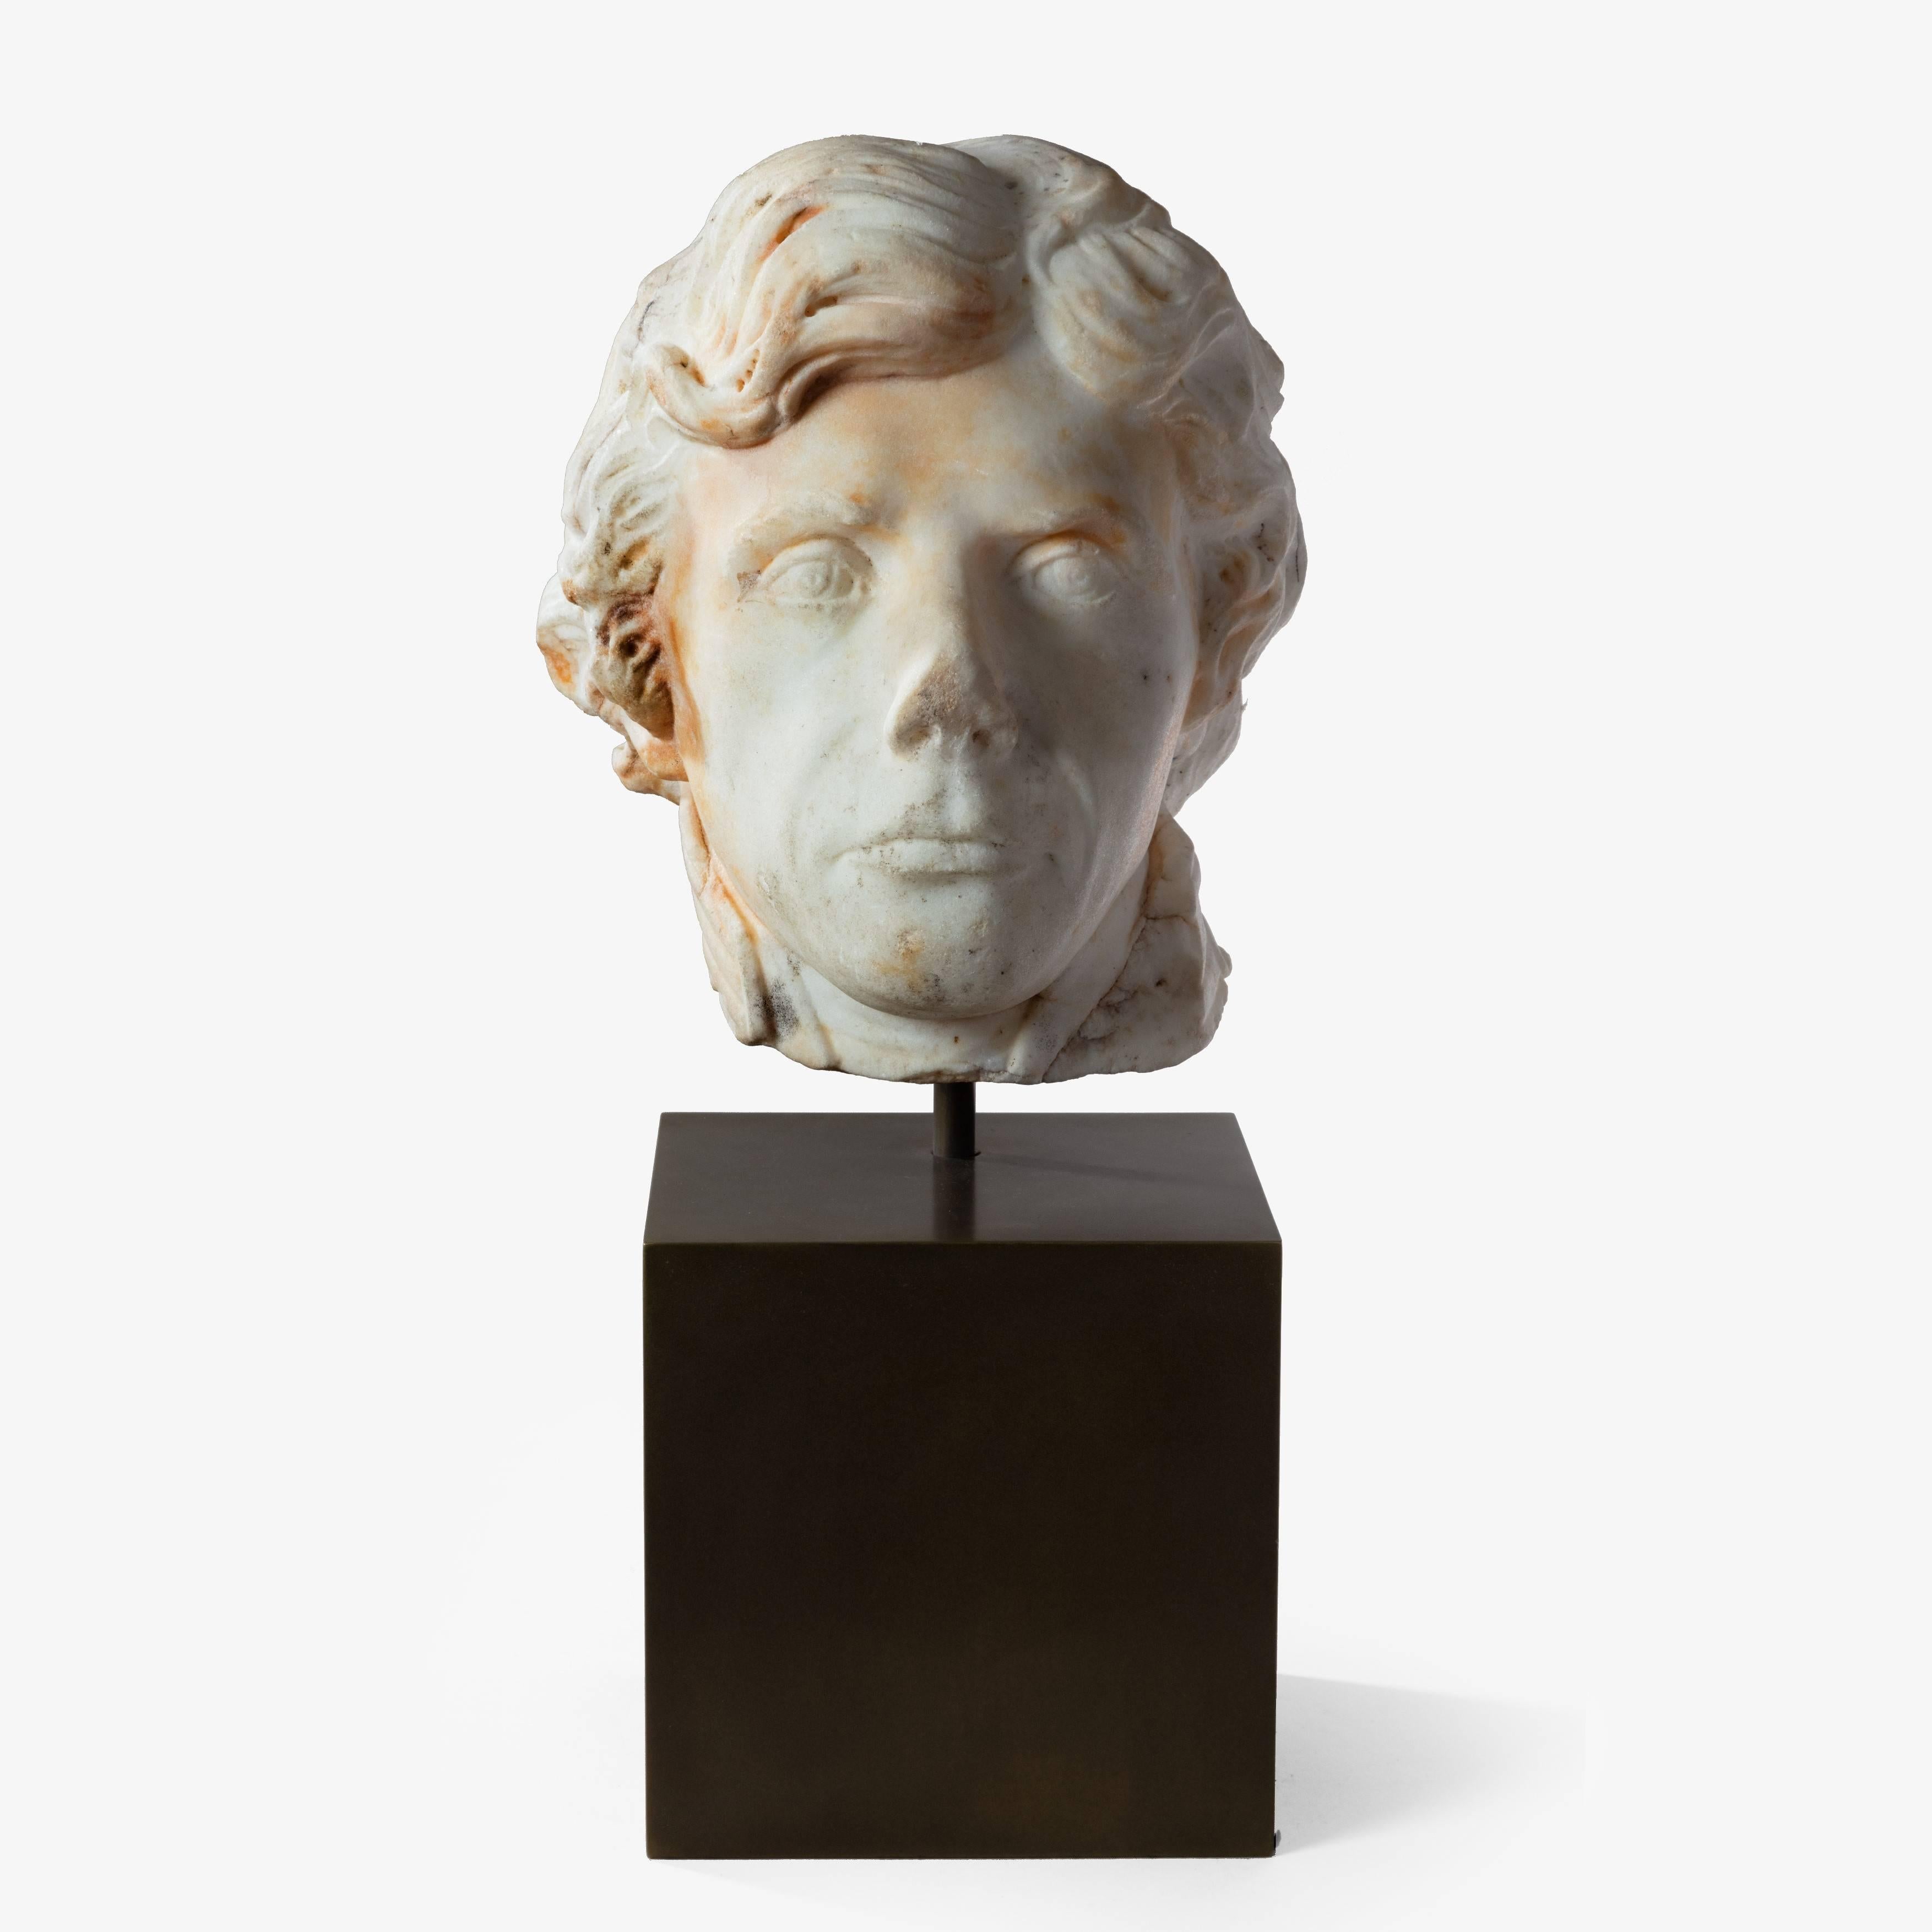 A Marble Head of Admiral Lord Nelson from a bust by or after Thaller and Ranson, circa 1801-1805 The antique condition life-size head shown looking forward and mounted on a later bronzed wooden plinth.

Height of head: 11” (28cm) Overall height: 18”